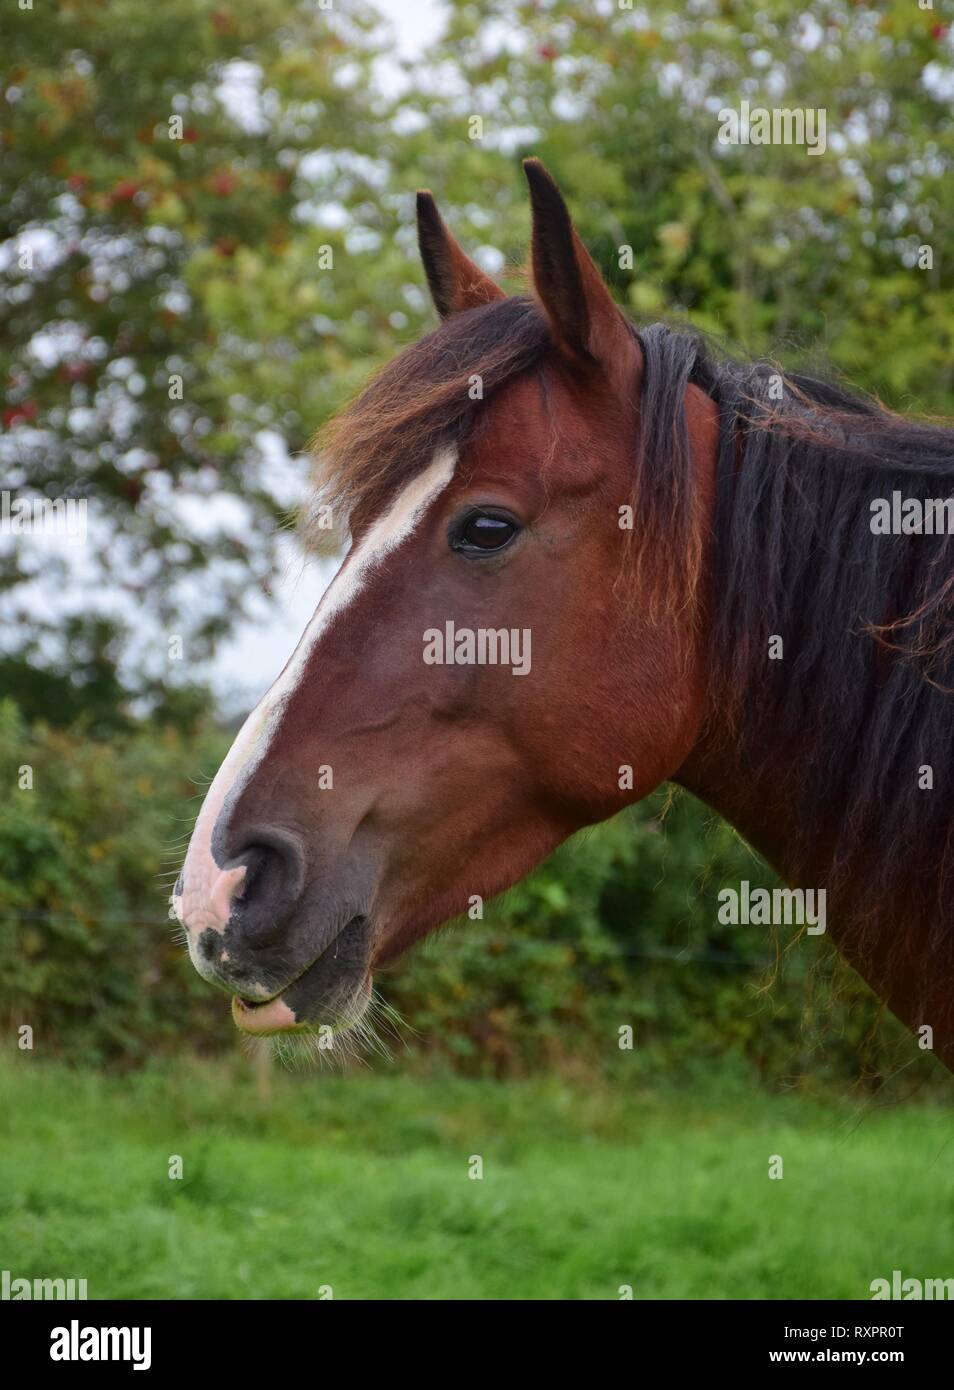 Portrait of a horse in Ireland. The horse is relaxed and has its lower lip a bit hanging. Stock Photo